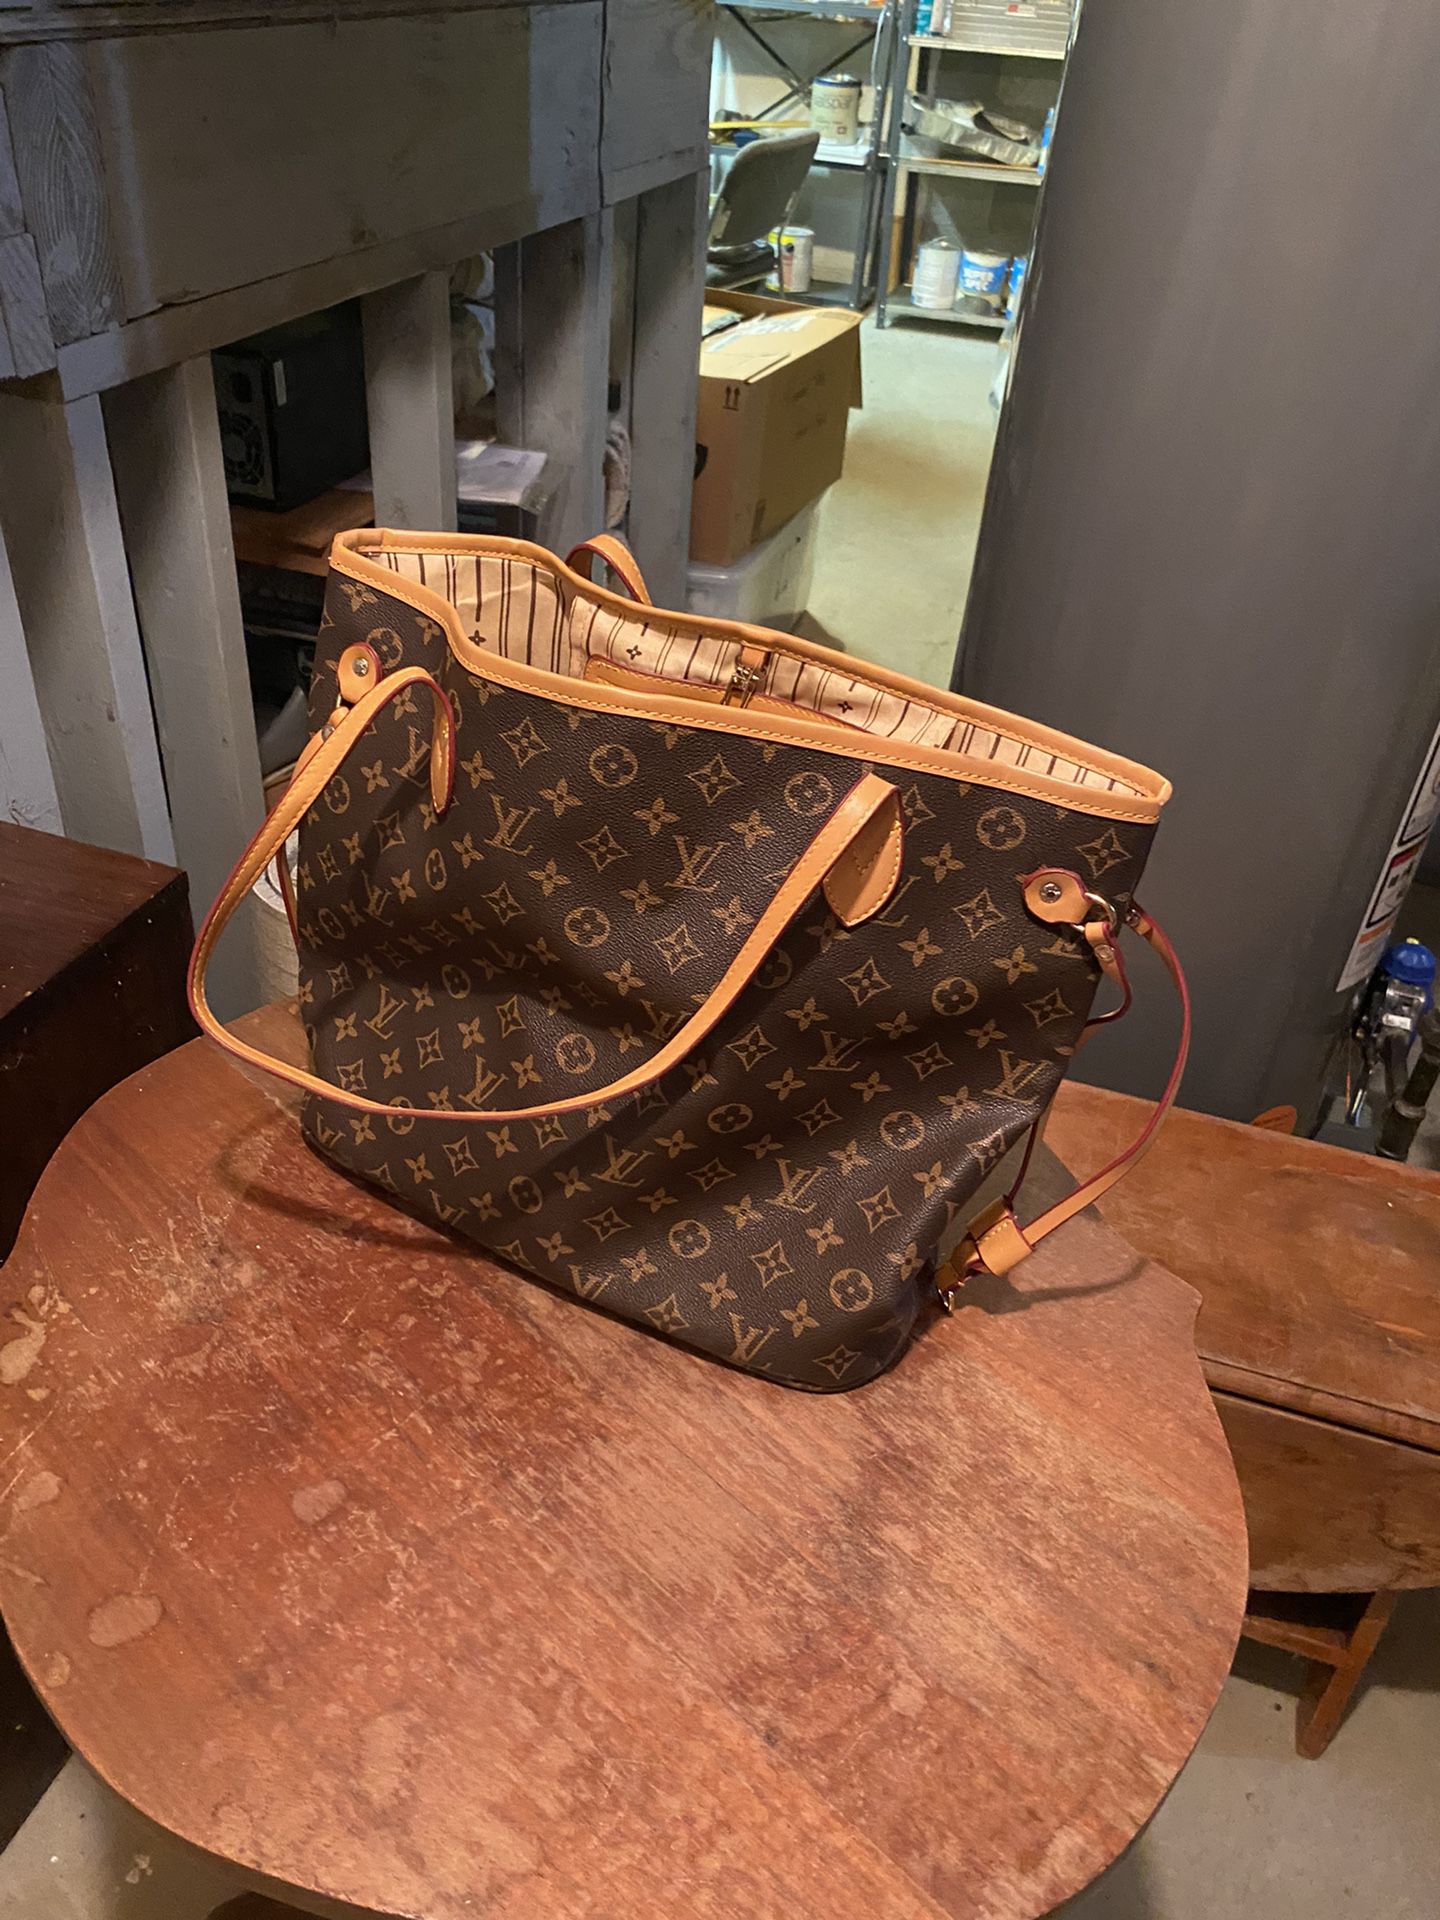 Wanted to share some fun LV items in case you were looking for the perfect  gift 😉😜 (prices listed in € in the caption of each picture) : r/ Louisvuitton